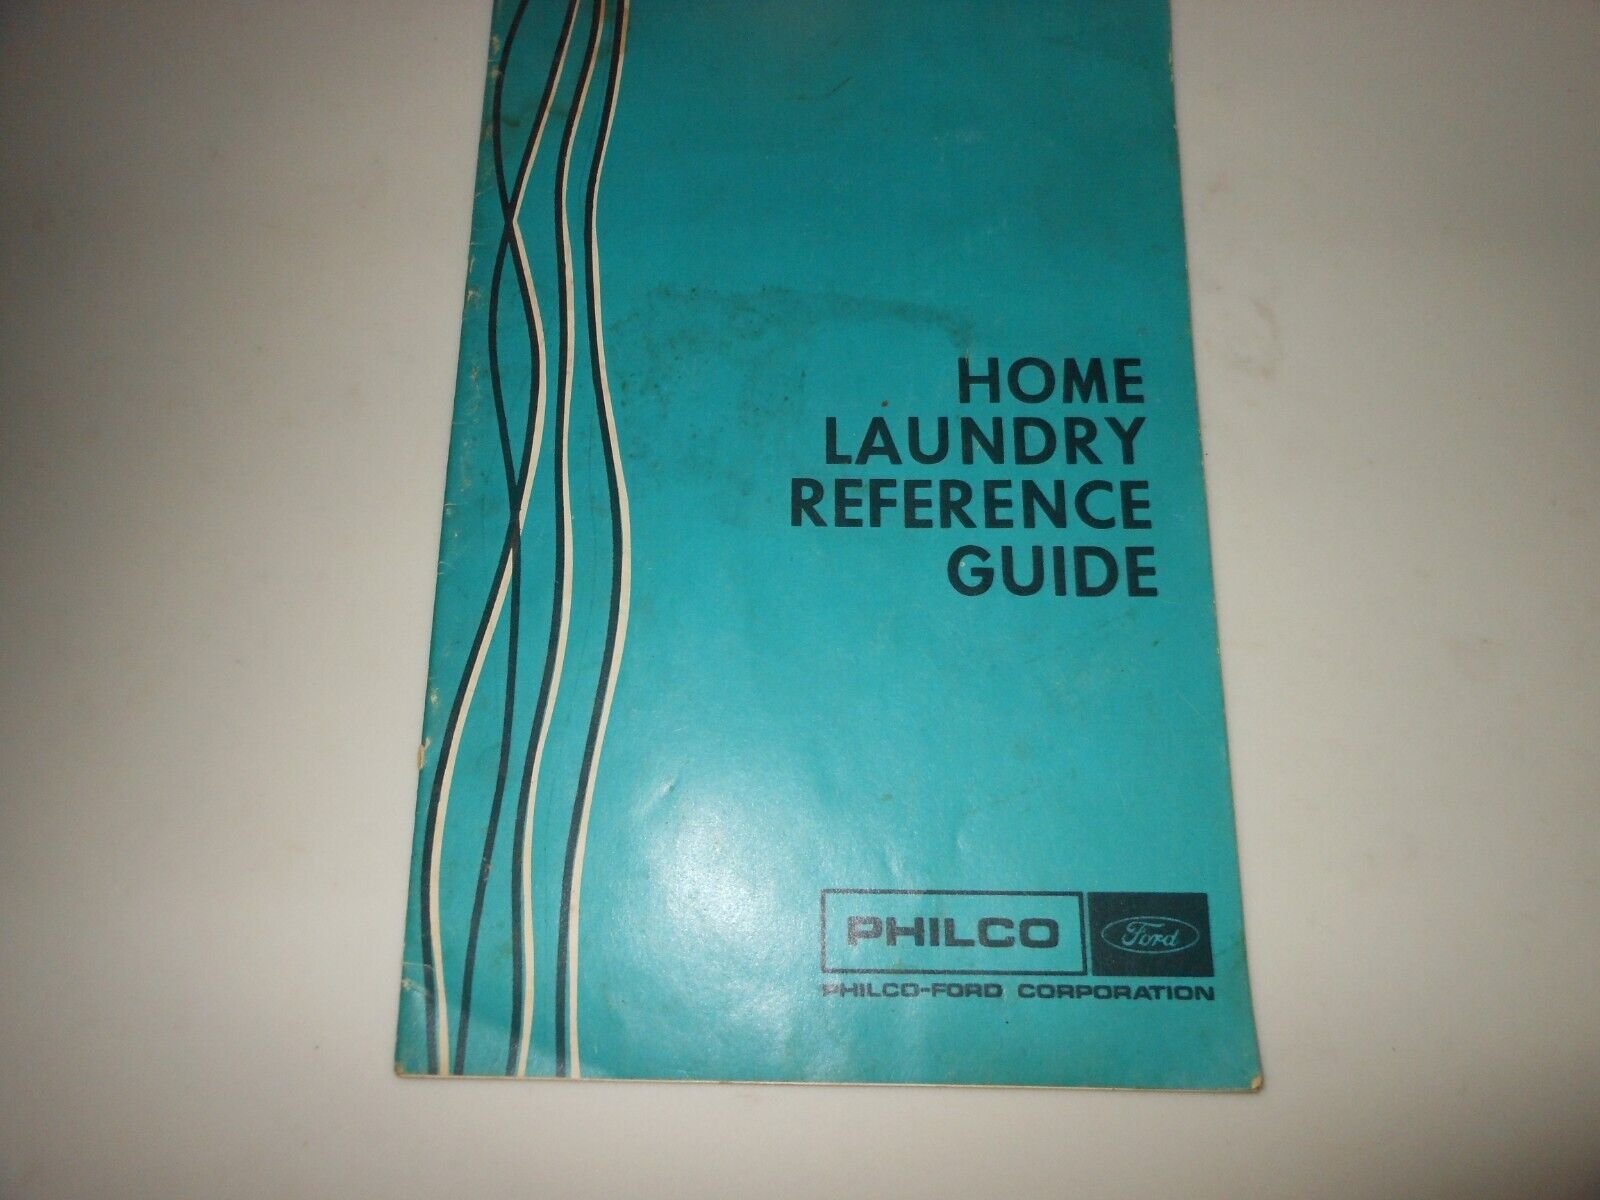 c1961-1974 Philco-Ford Corp: Home Laundry Reference Guide Booklet No 8514-516-1